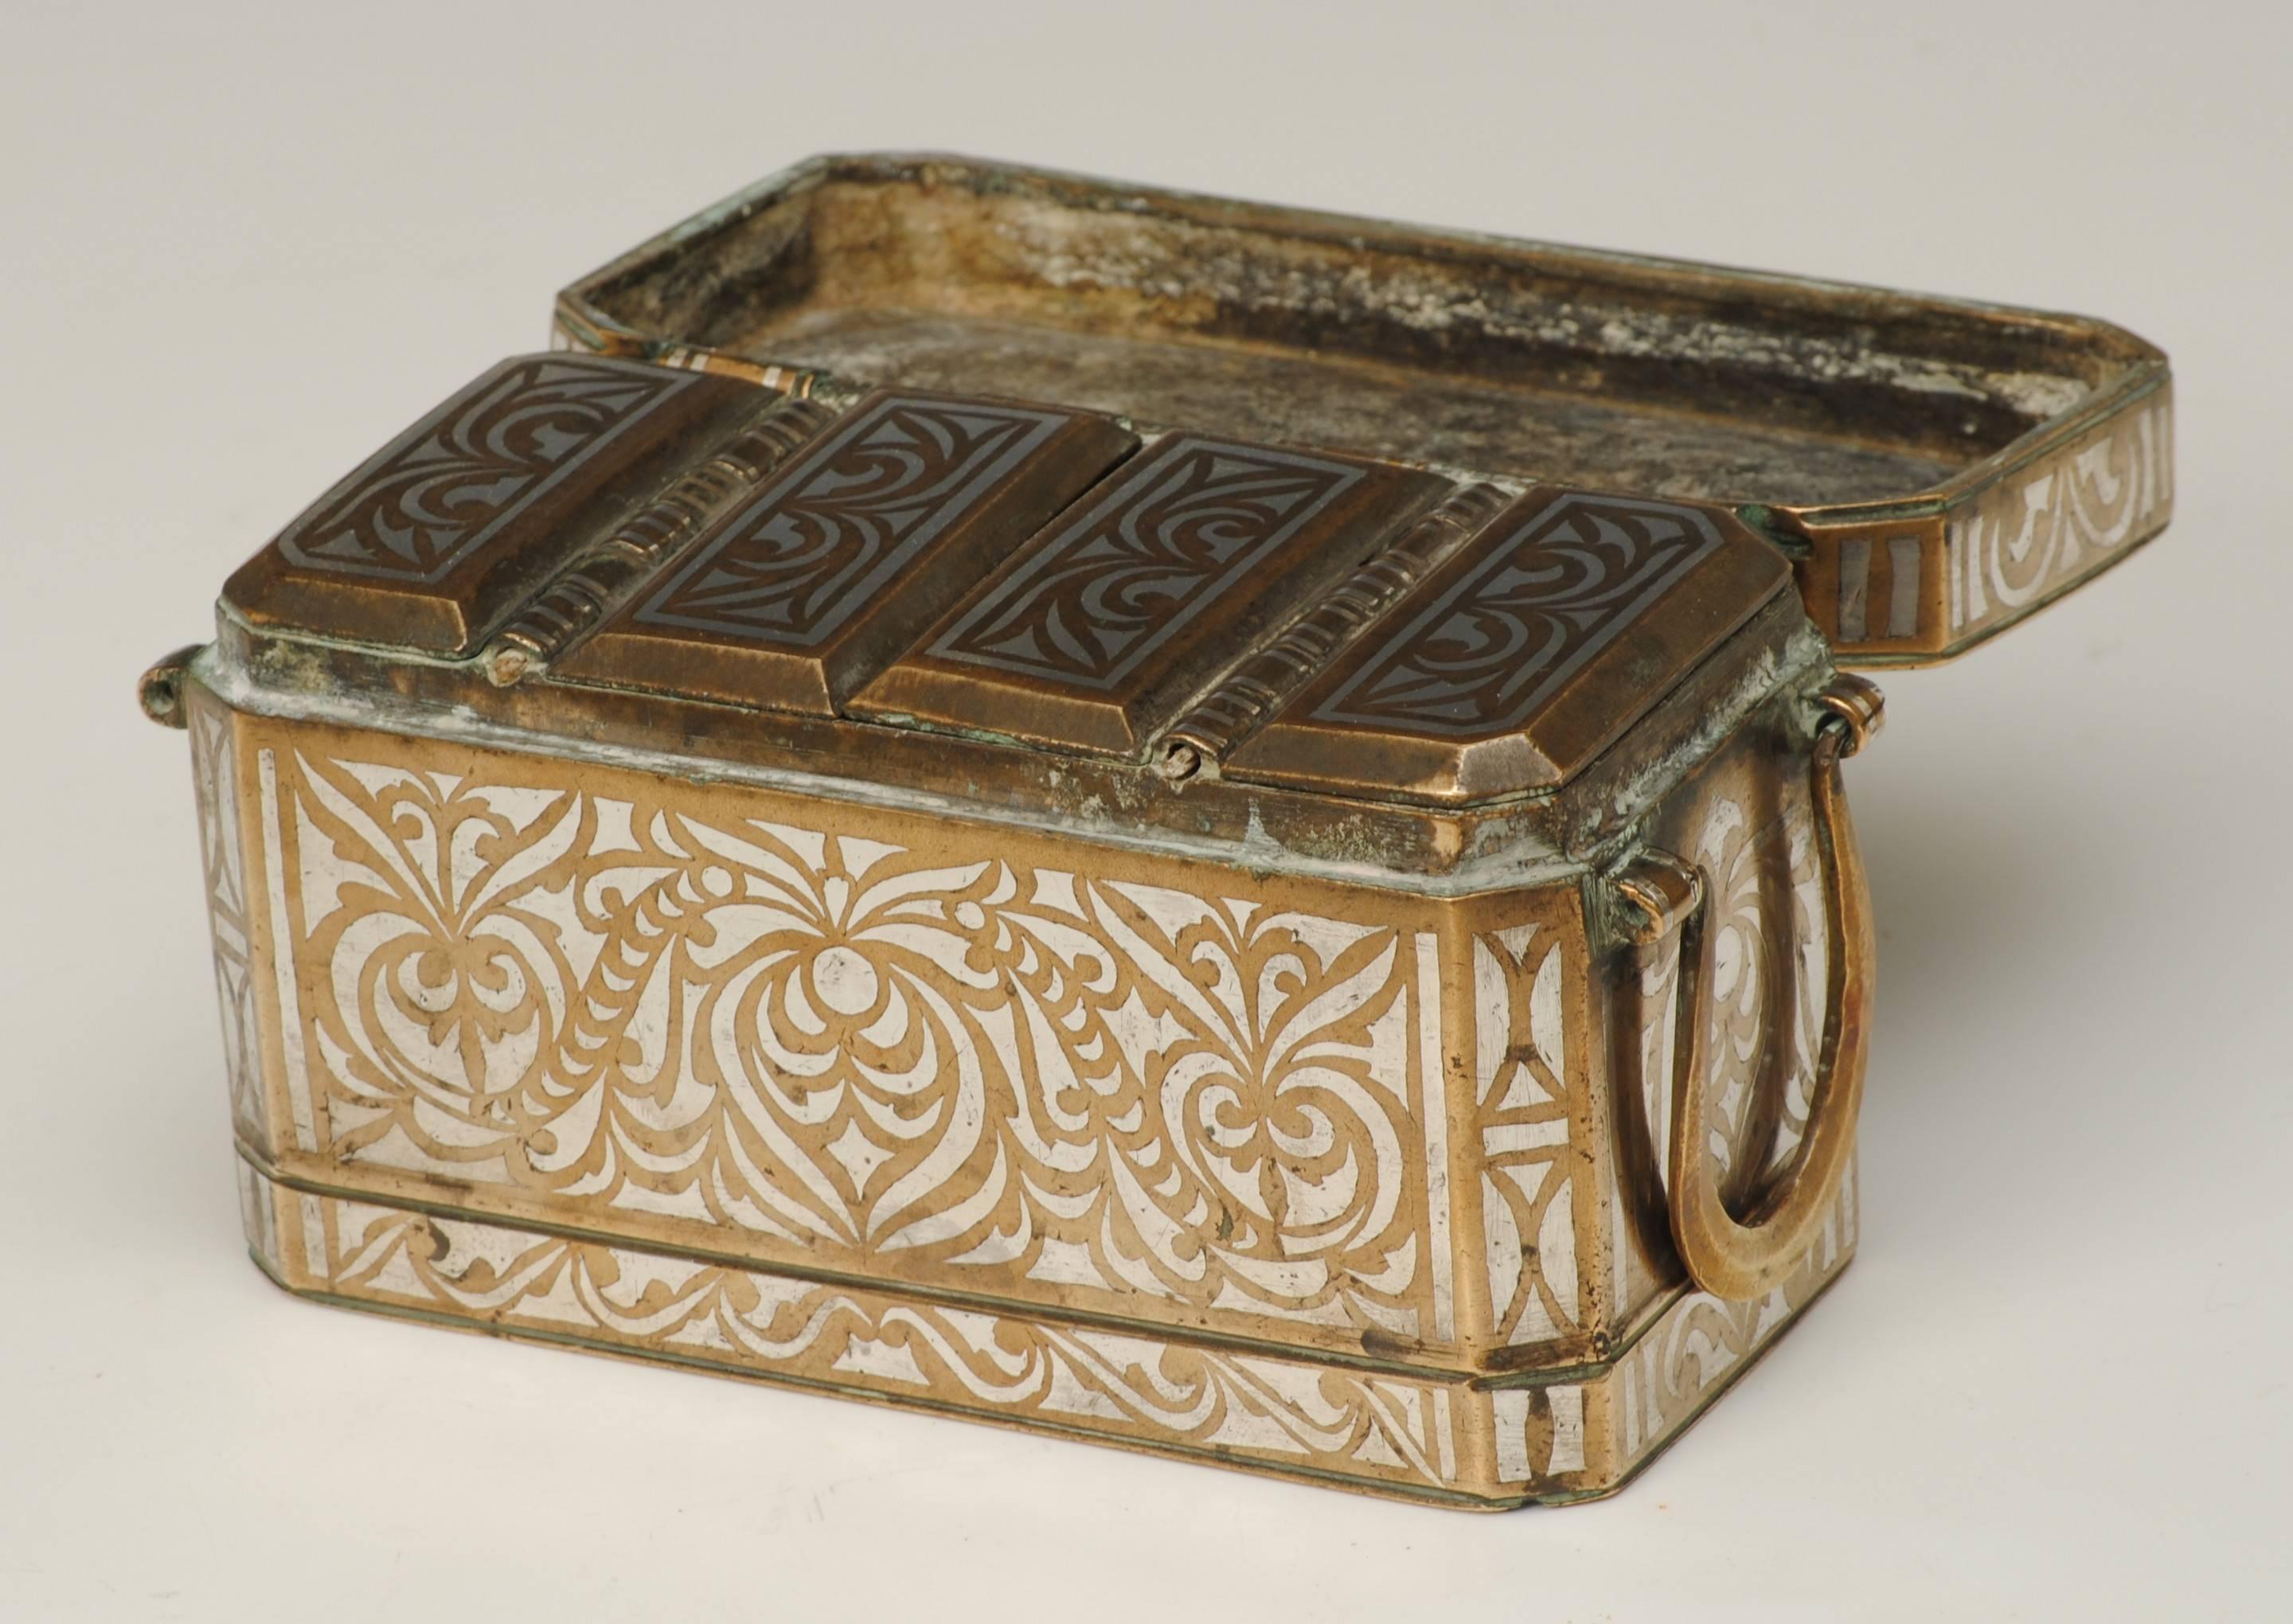 A good example of a betel nut box with silver inlay and four lidded compartments.